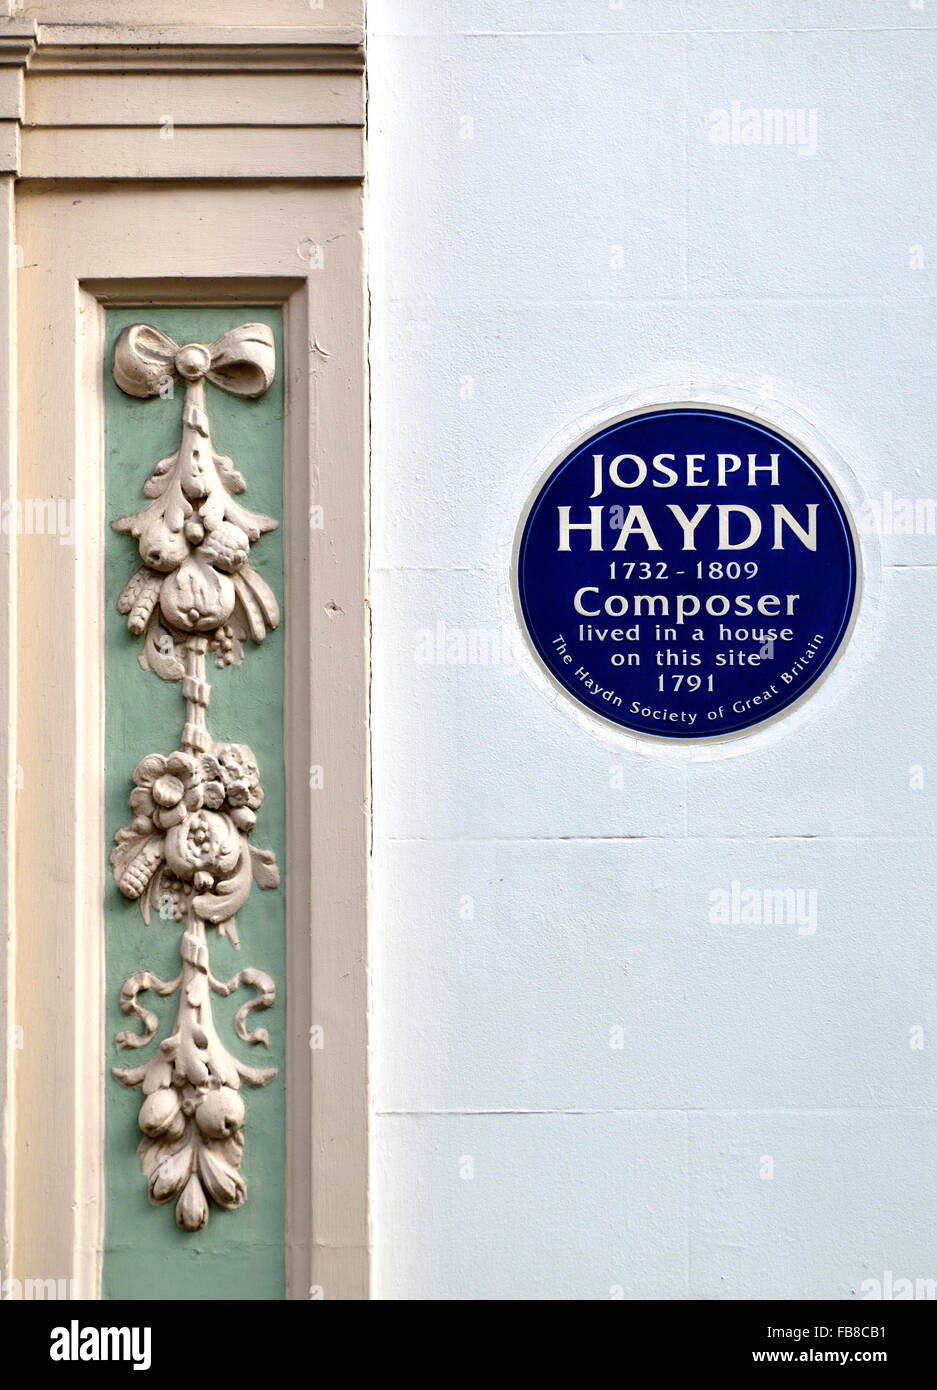 London, England, UK. Commemorative Blue Plaque: Joseph Haydn (1732 - 1809) Composer lived in a house on this site 1791... Stock Photo